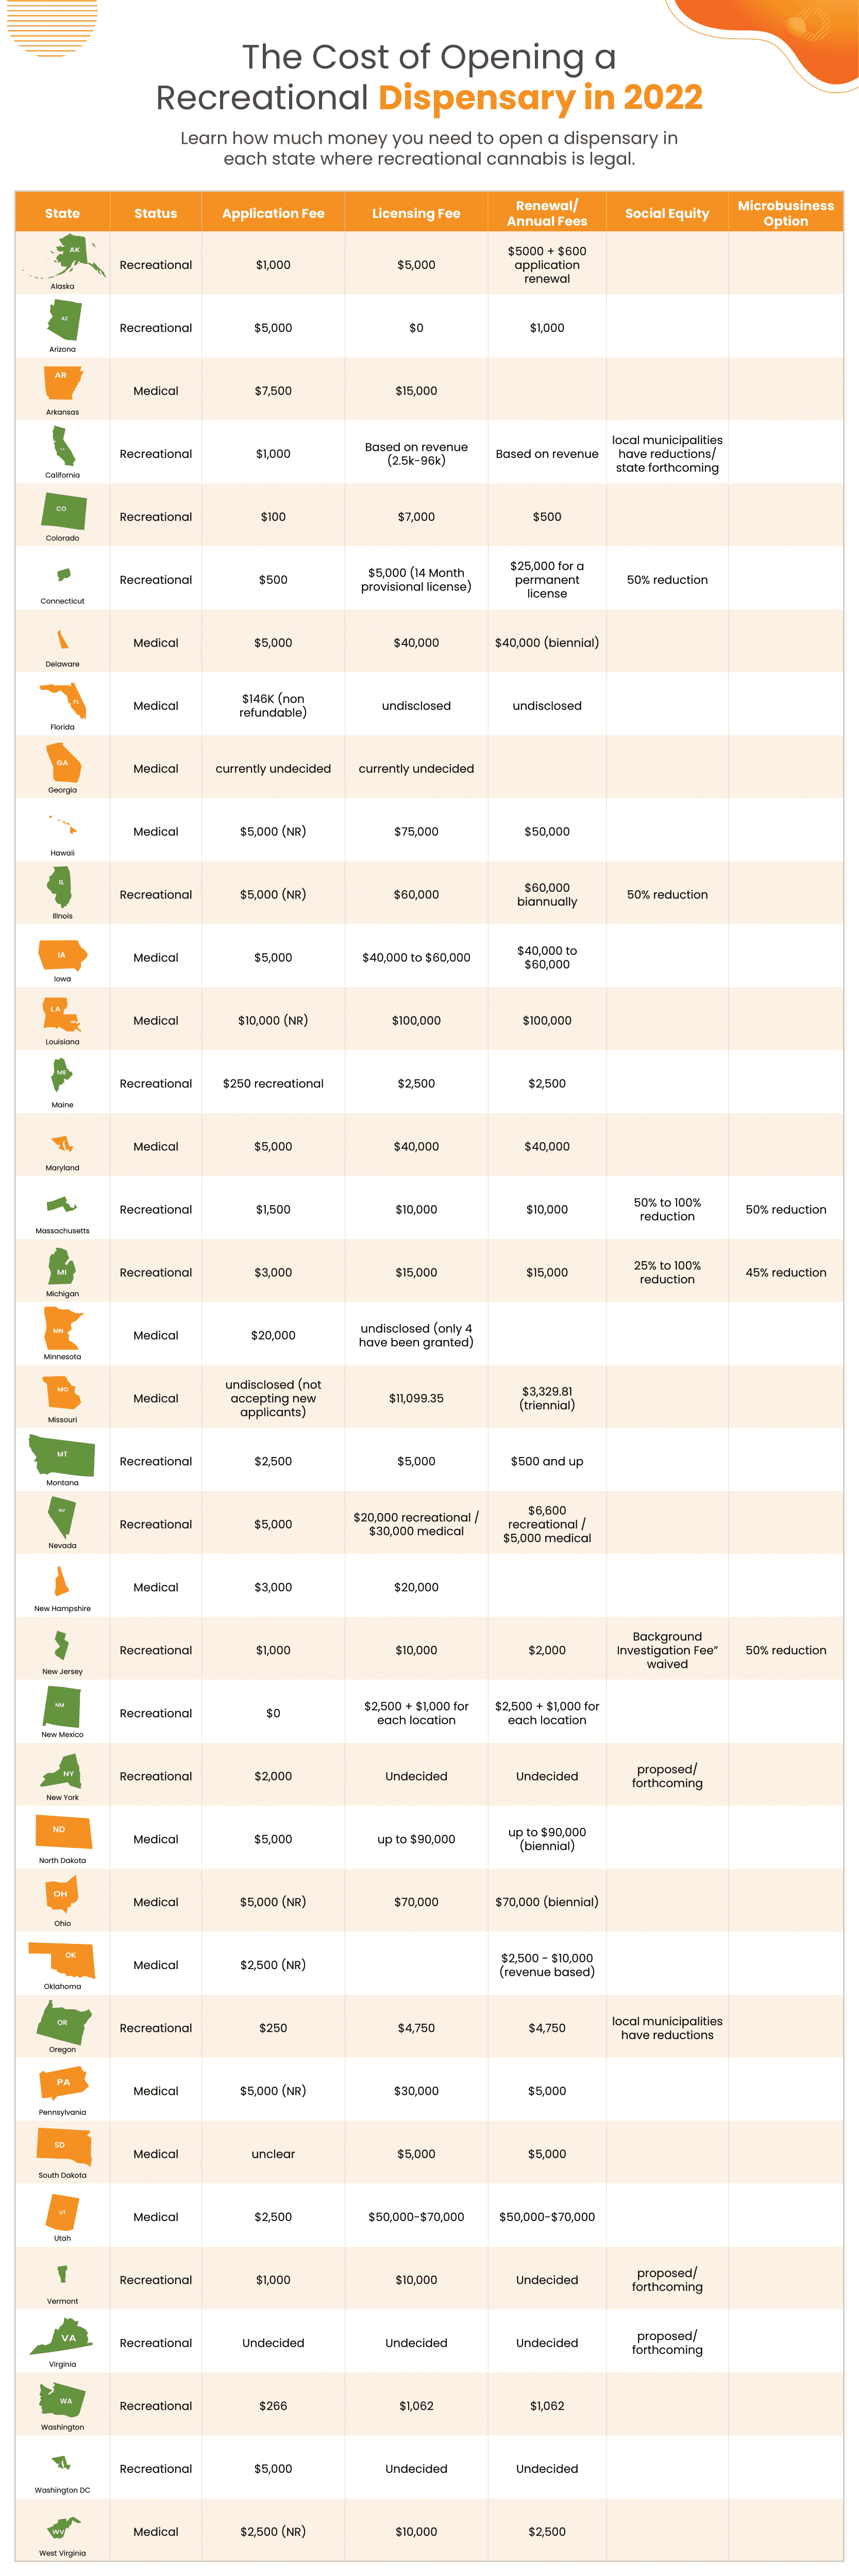 An infograph showing the application, licensing, and renewal fees for both recreational and medical marijuana states